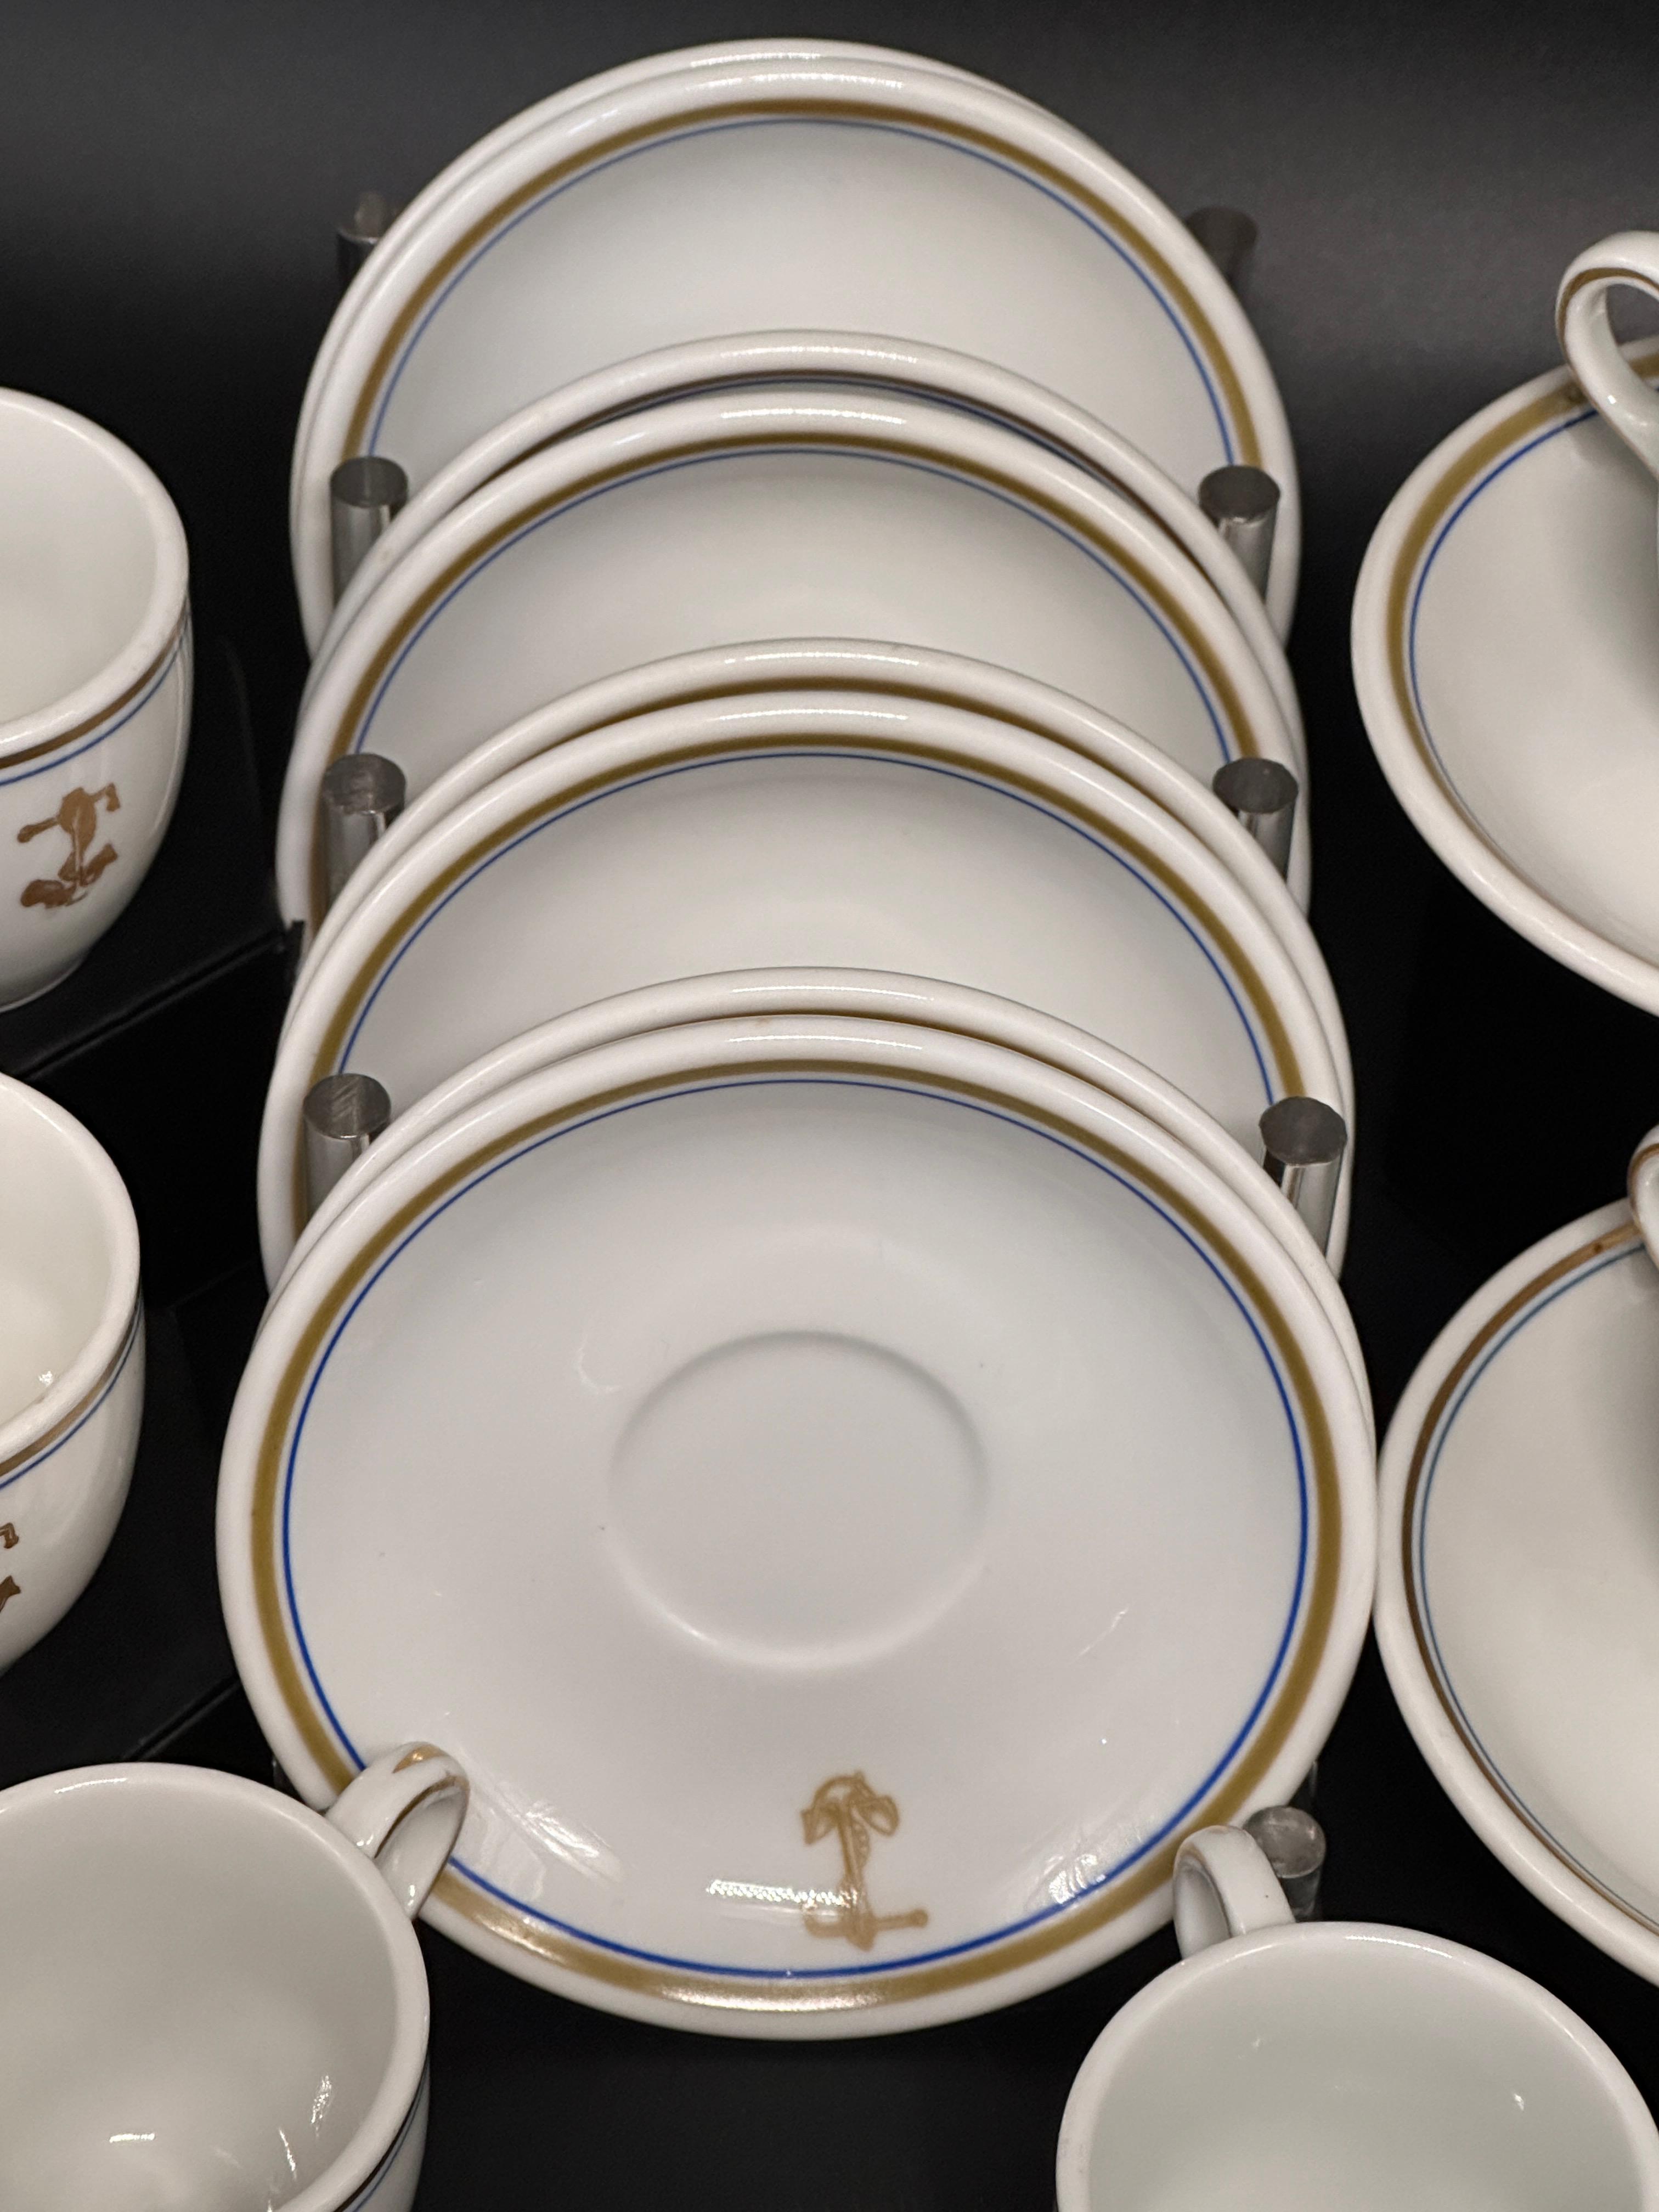 US Navy China Tea Cup and Saucer Collection